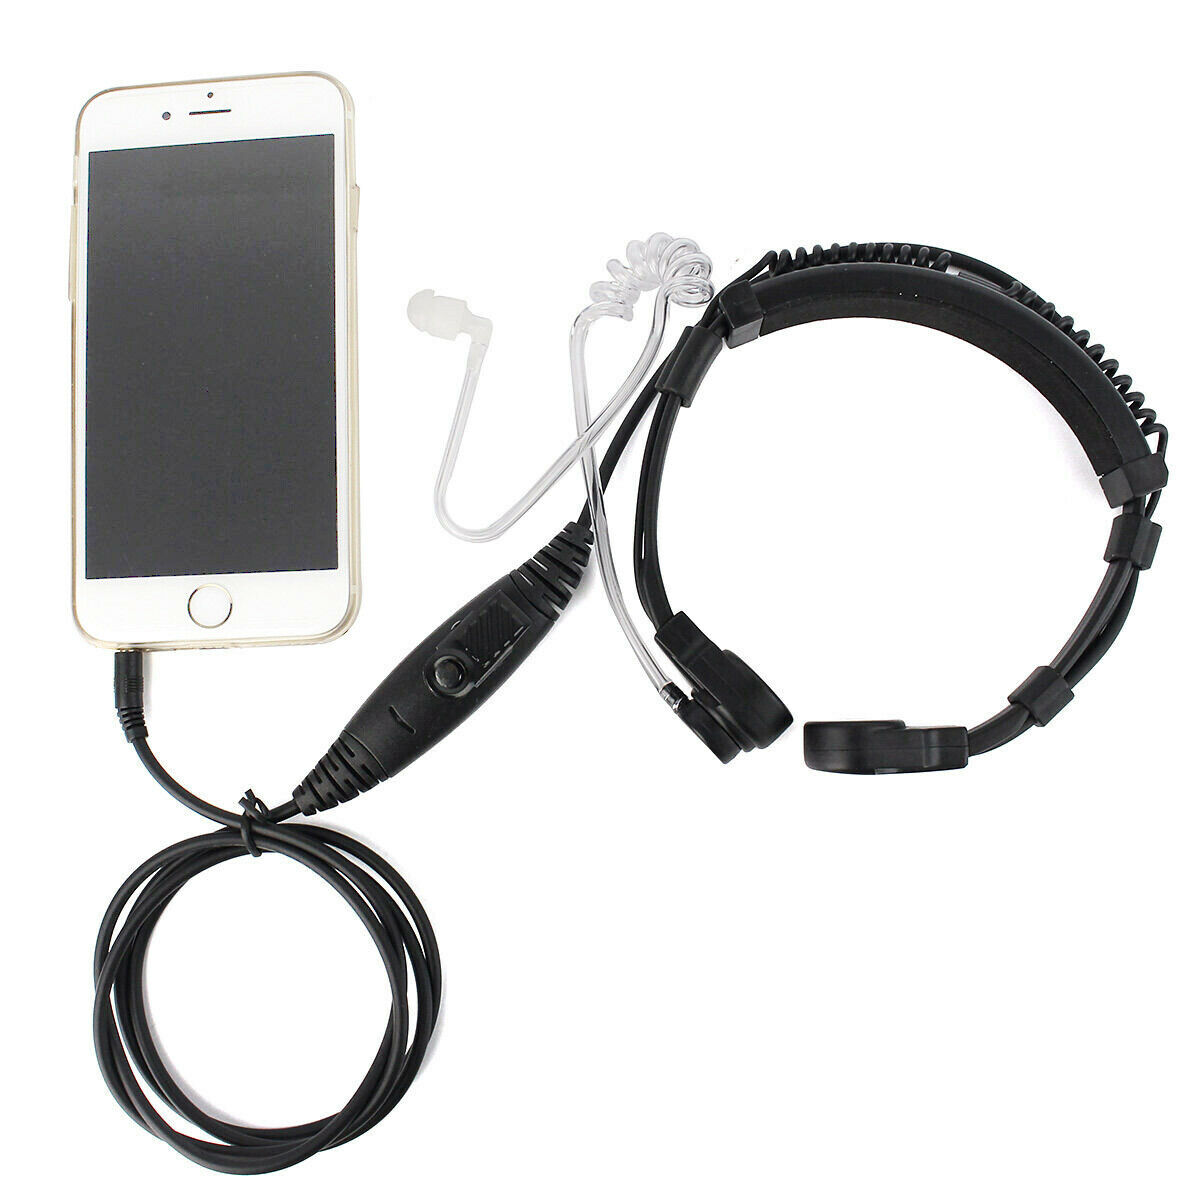 Retractable Throat MIC Covert Acoustic Tube Earpiece for 3.5mm Phone